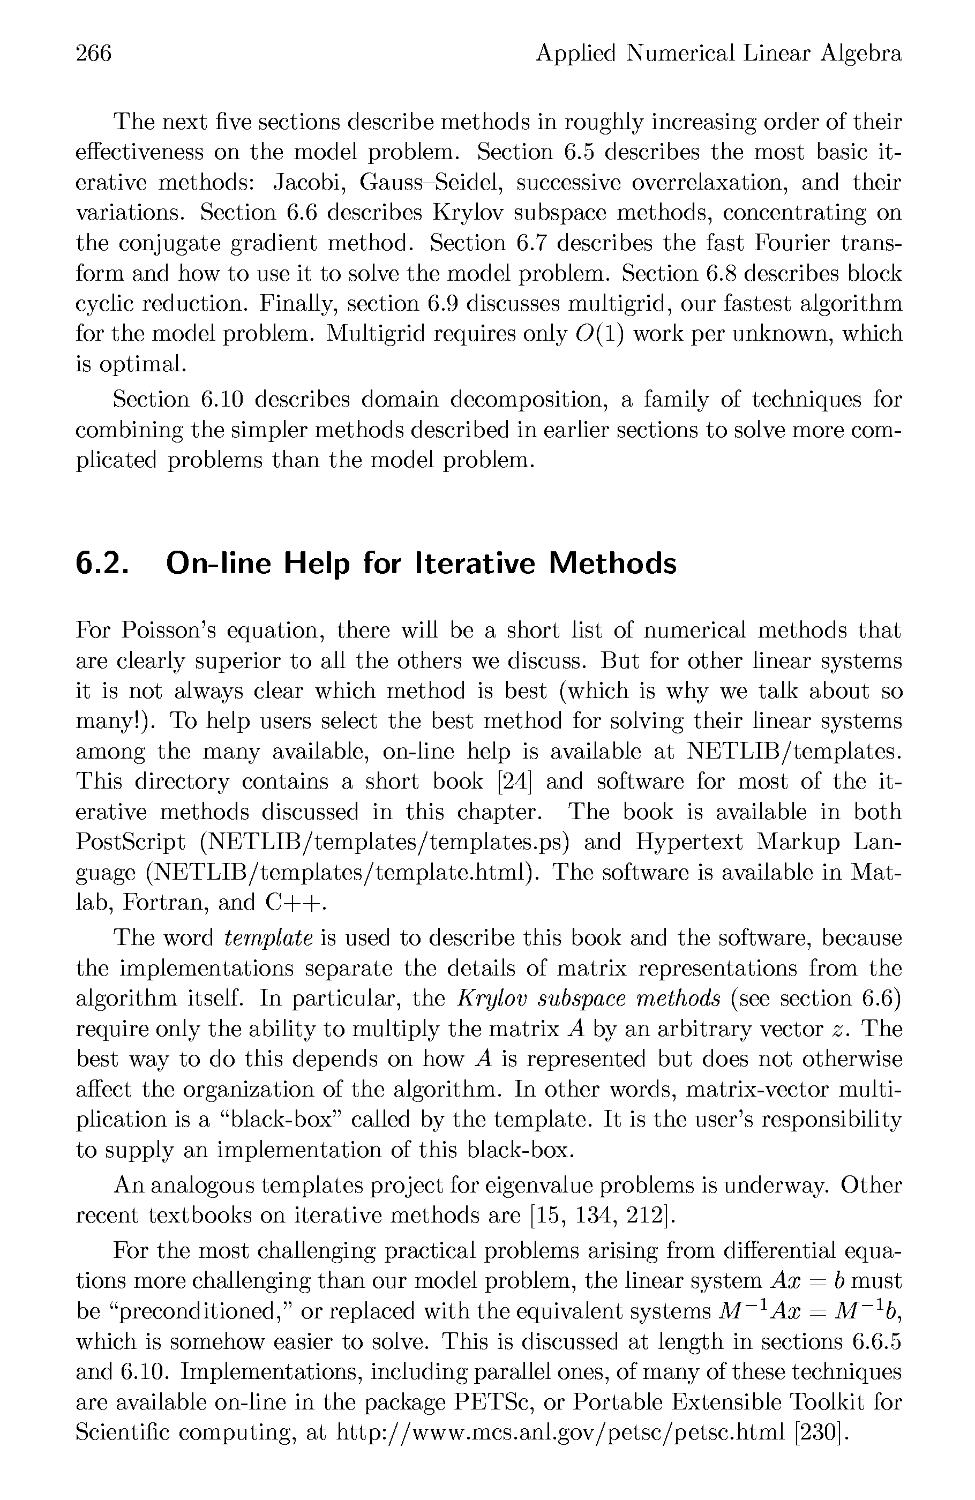 6.2 On-line Help for Iterative Methods